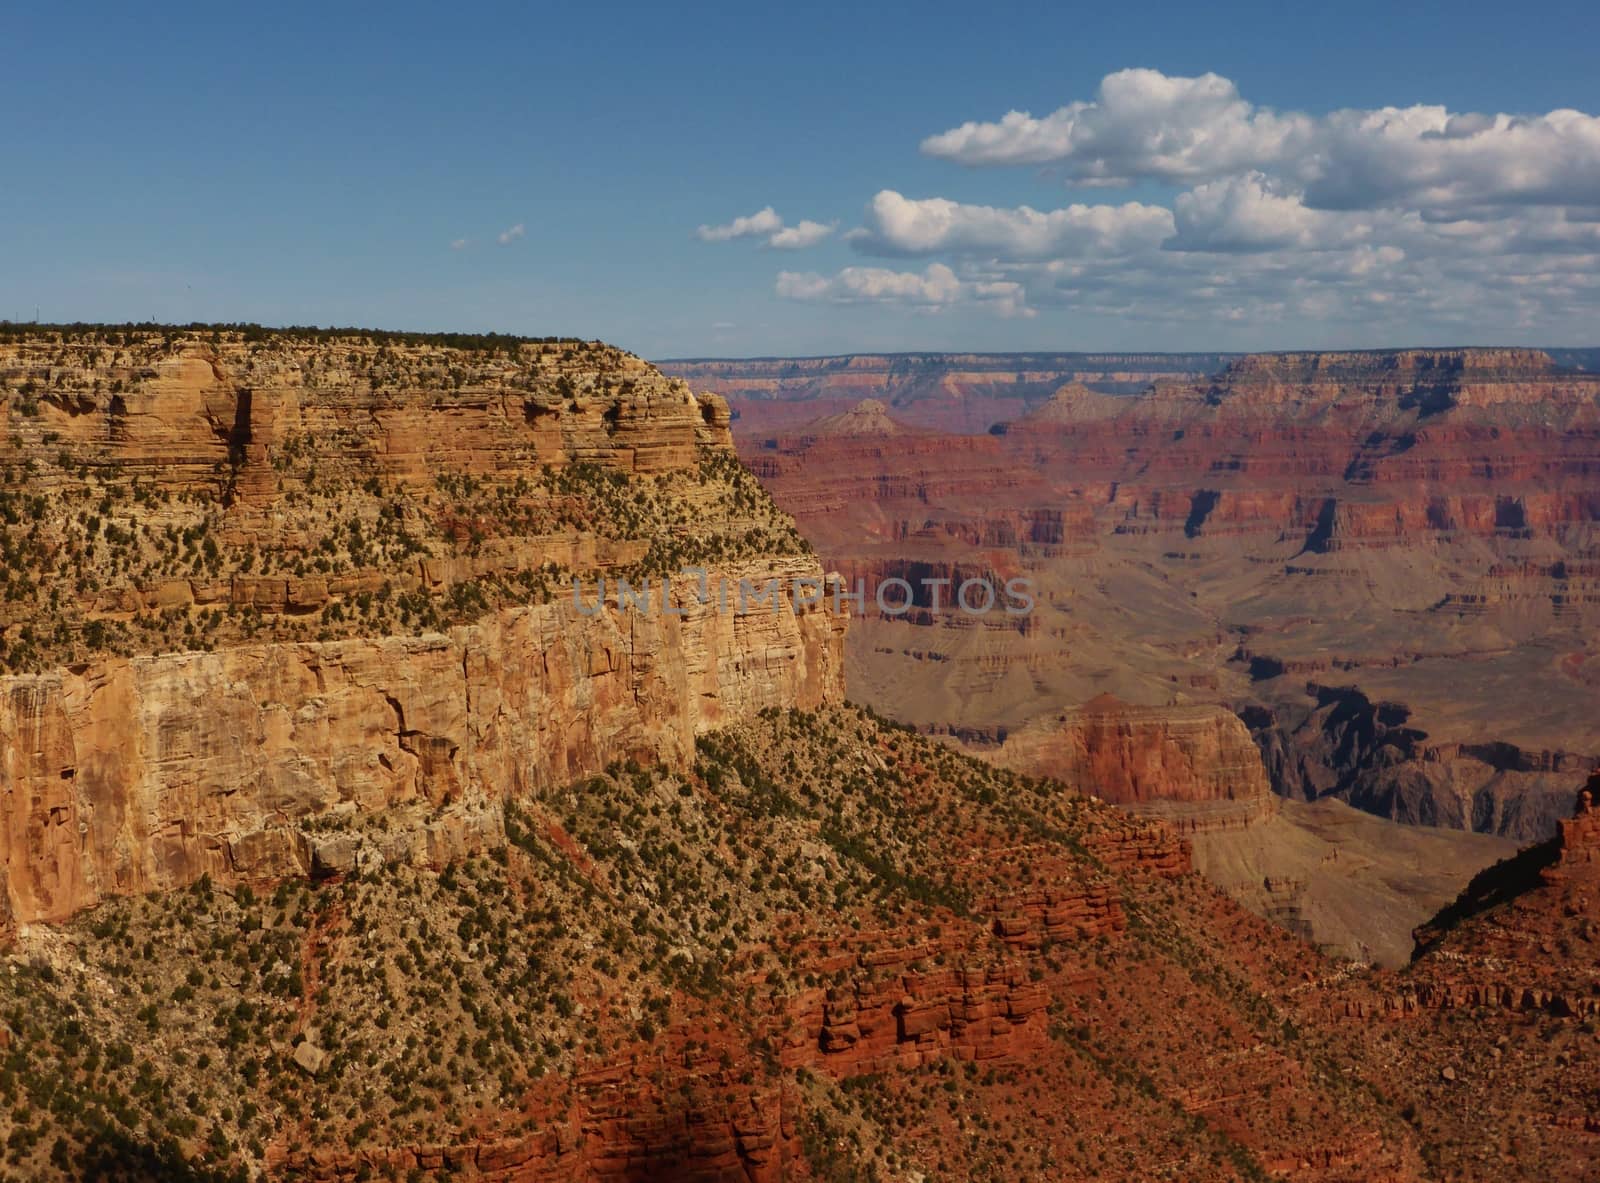 A stunning image of the Grand Canyon taken from the South rim.